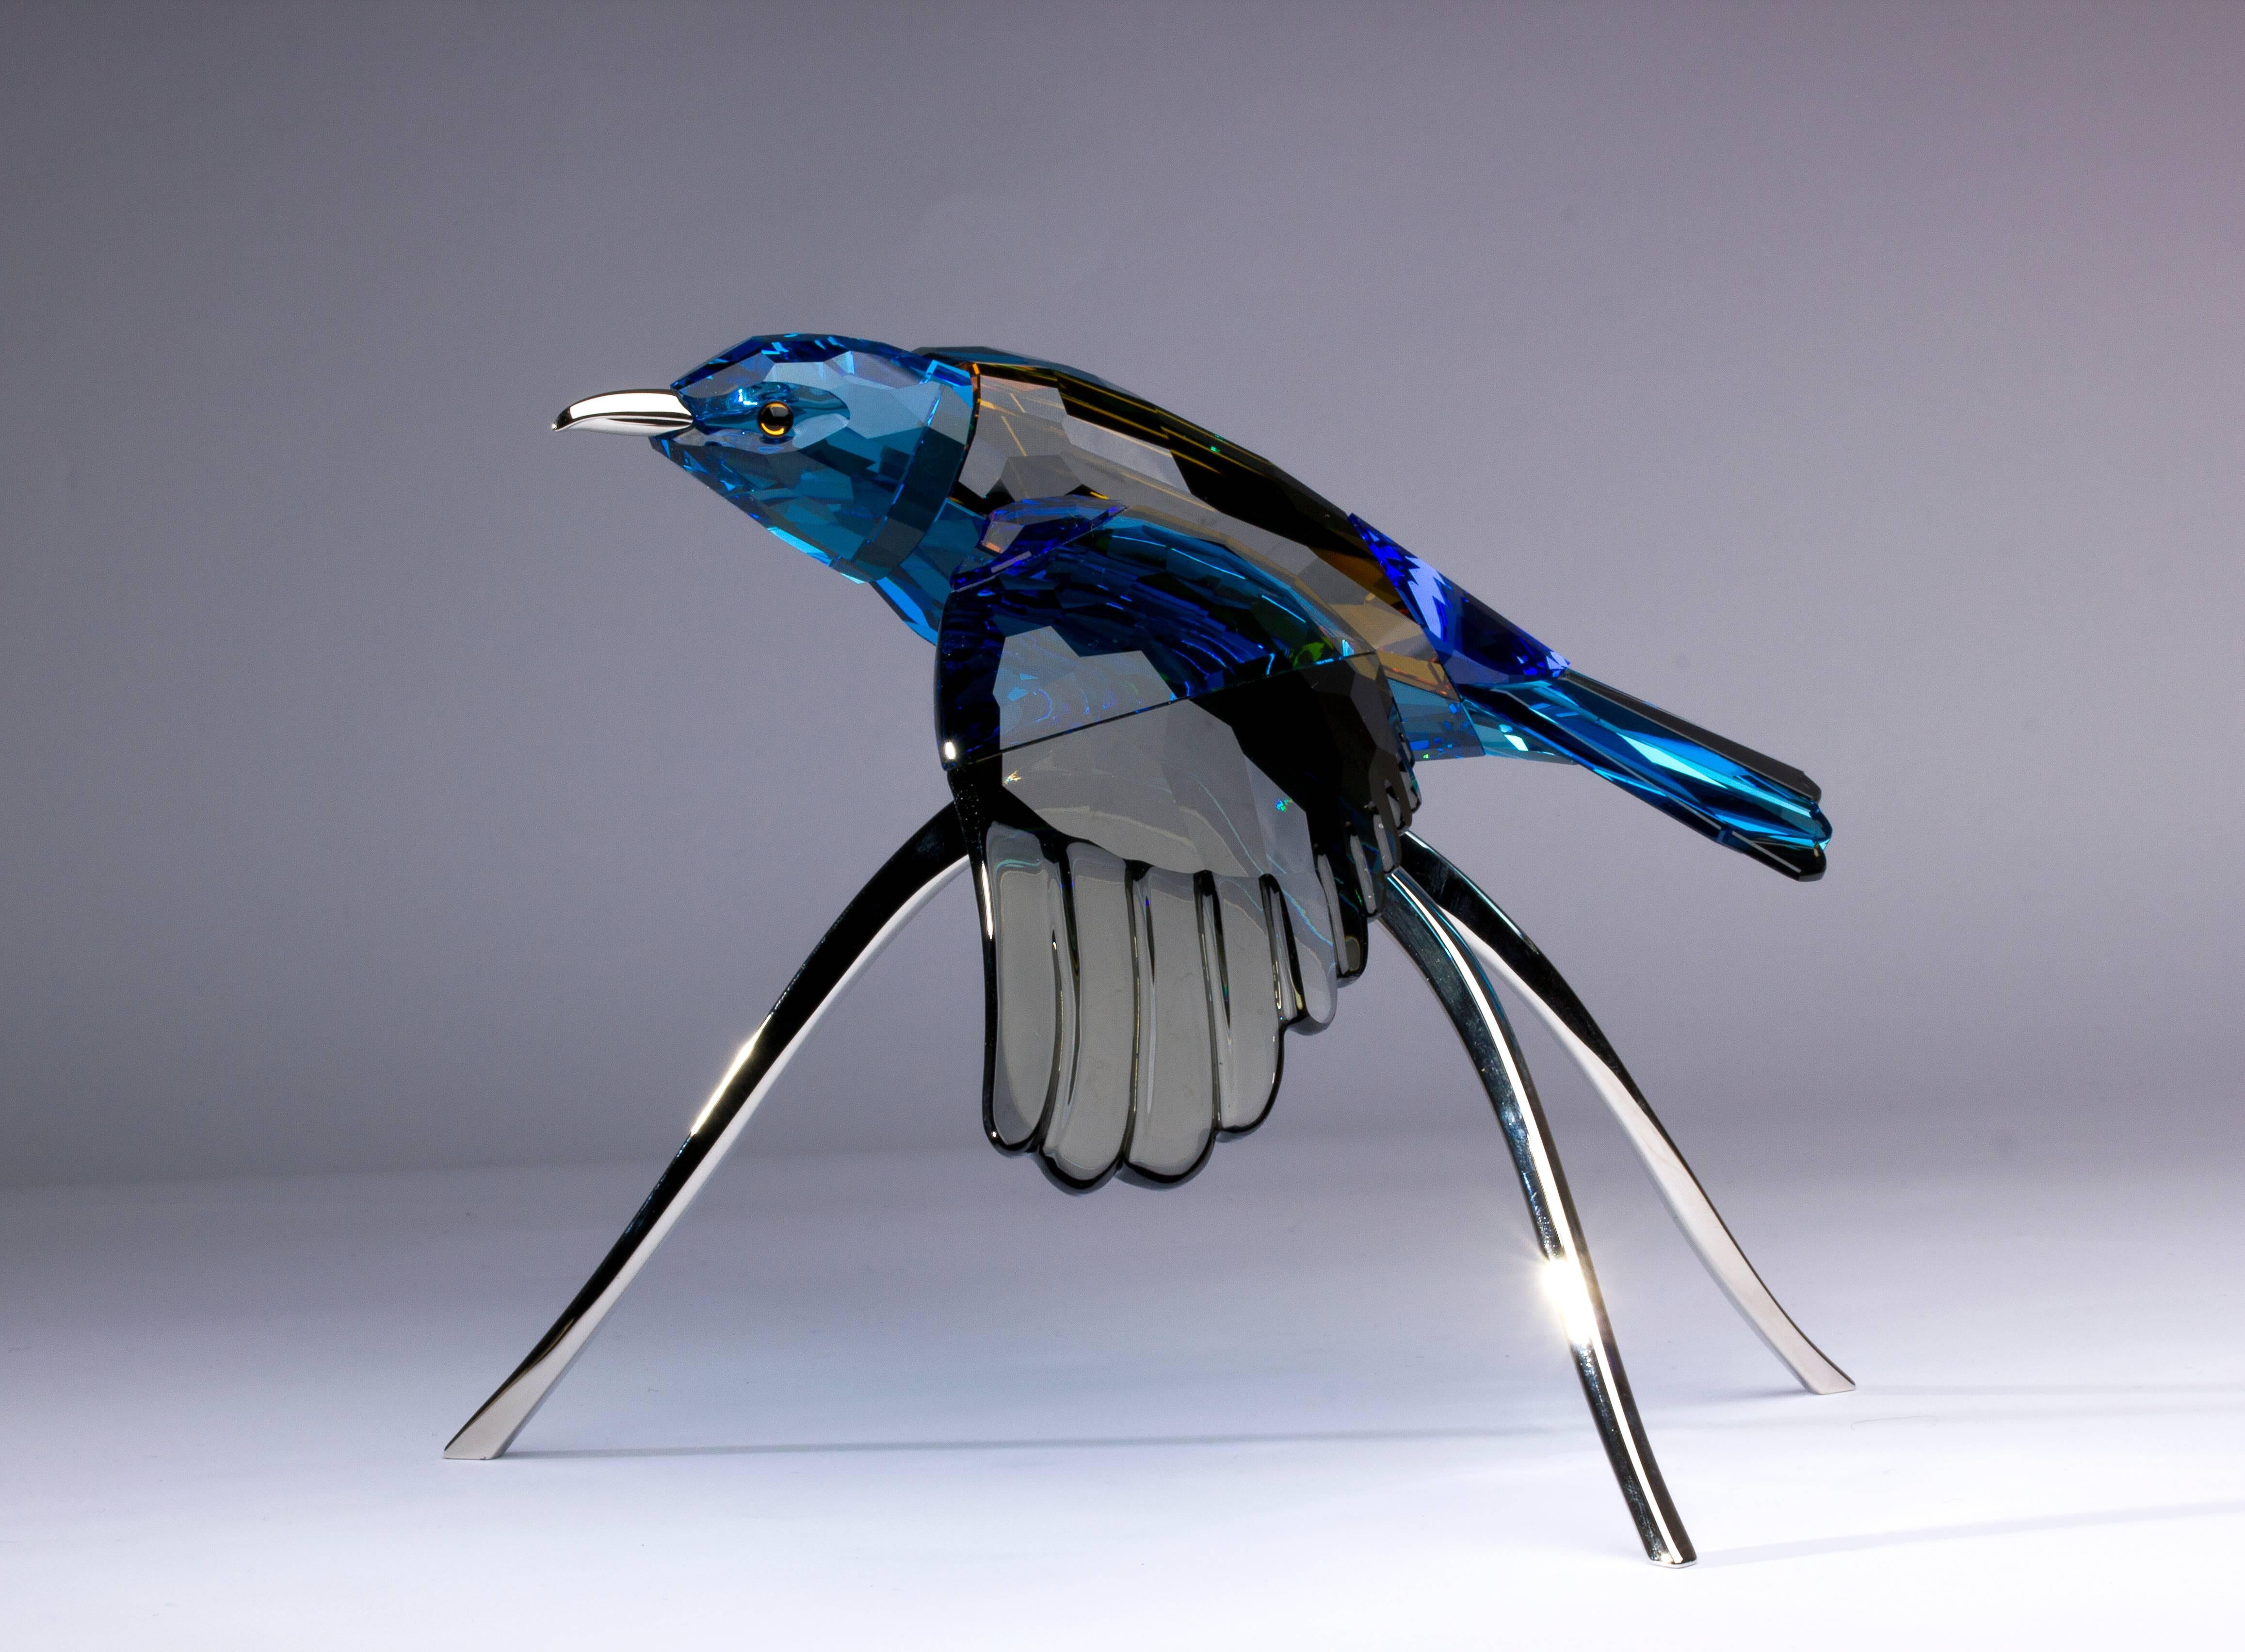 Beautifully executed in full color crystal, this stunning sculpture captures the power and beauty of the bird in flight. It shows natural color combinations such as light and dark sapphire crystal and is fixed to a silver-tone metal.